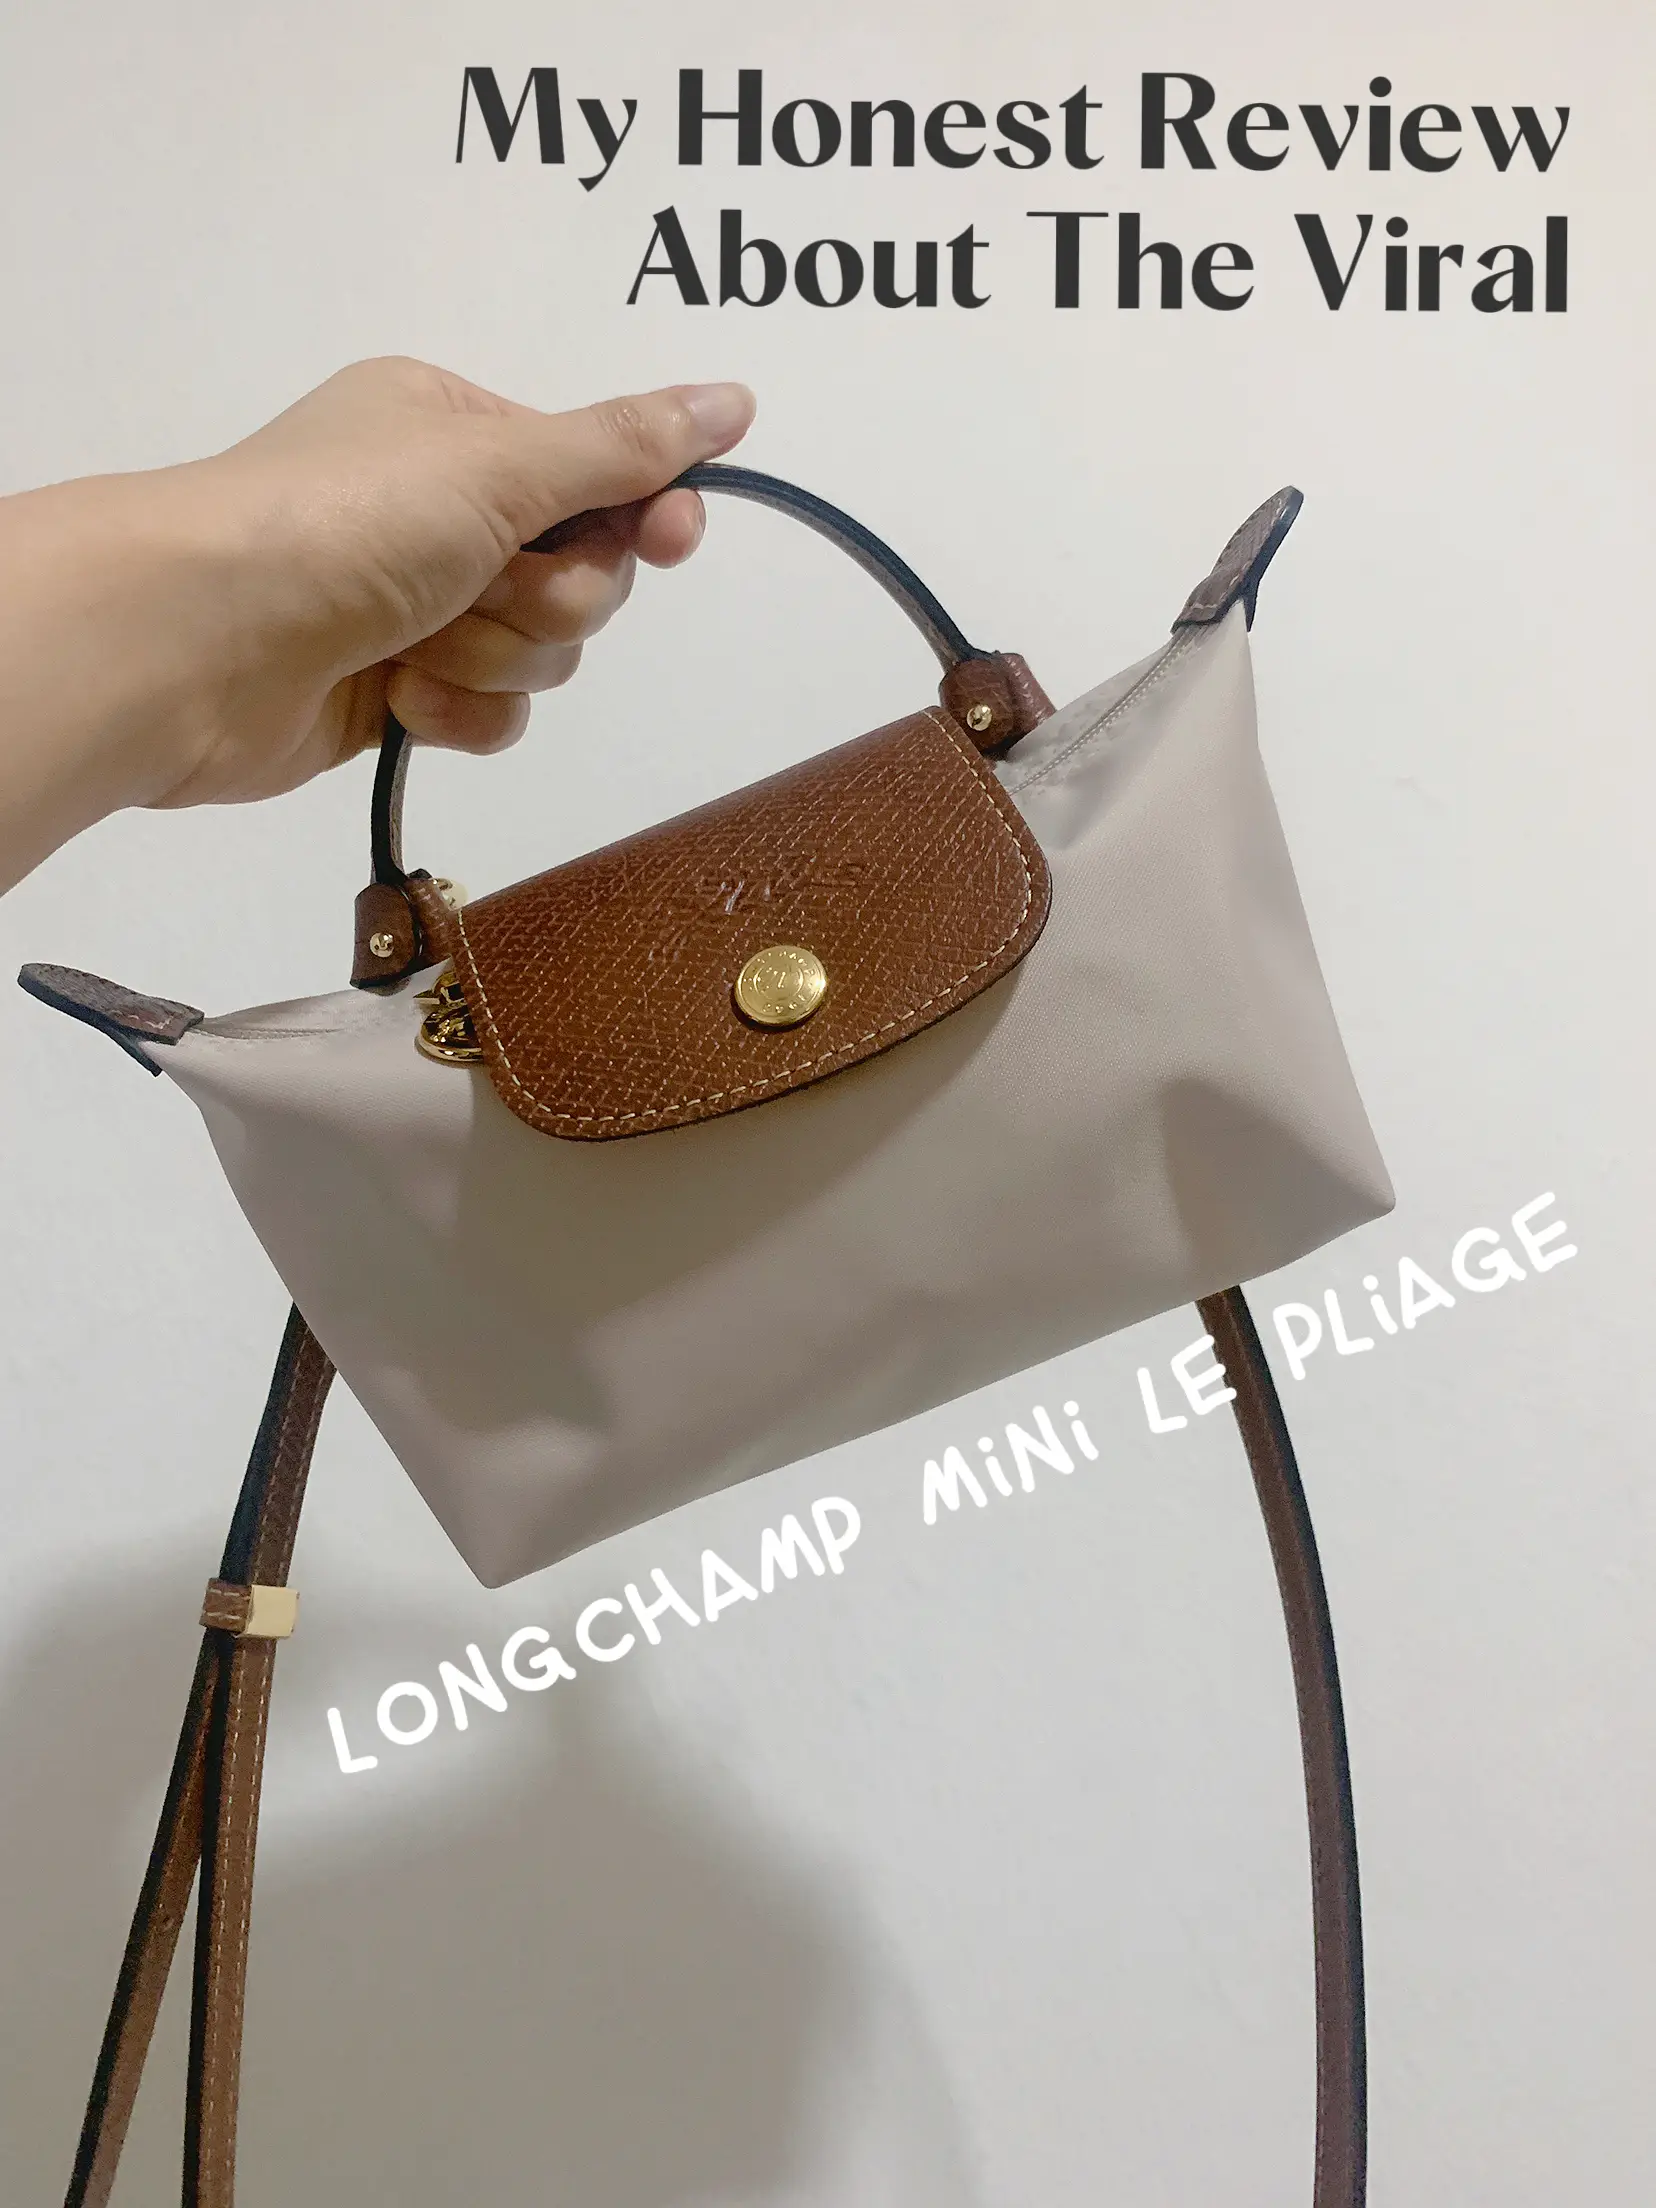 GETTING THE VIRAL MINI LONGCHAMP? 💼💸, Gallery posted by germaine 🪷